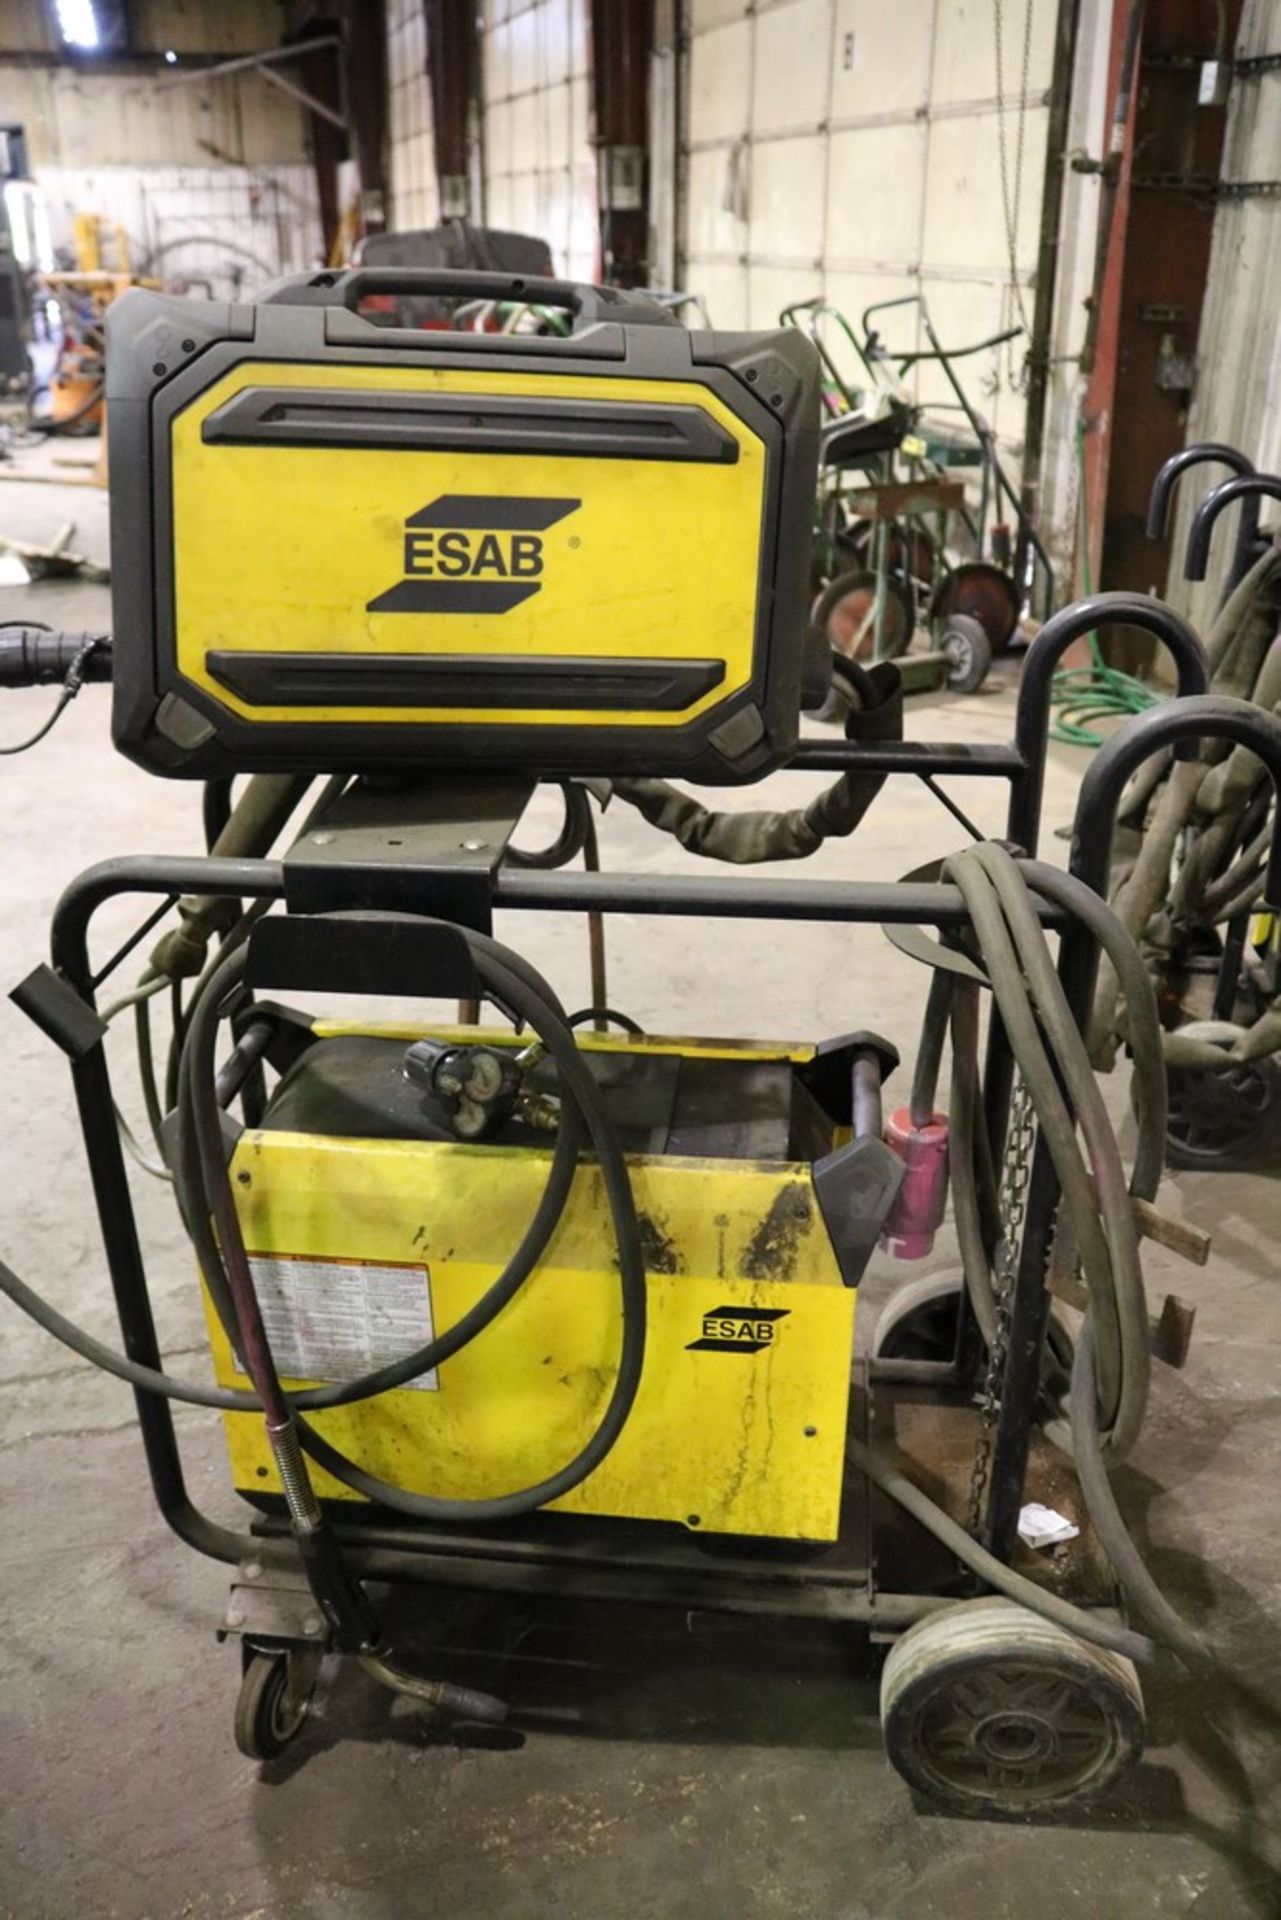 ESAB Warrior 500i Multi Process Welder with Robust Feed Pro Unit - Image 8 of 10